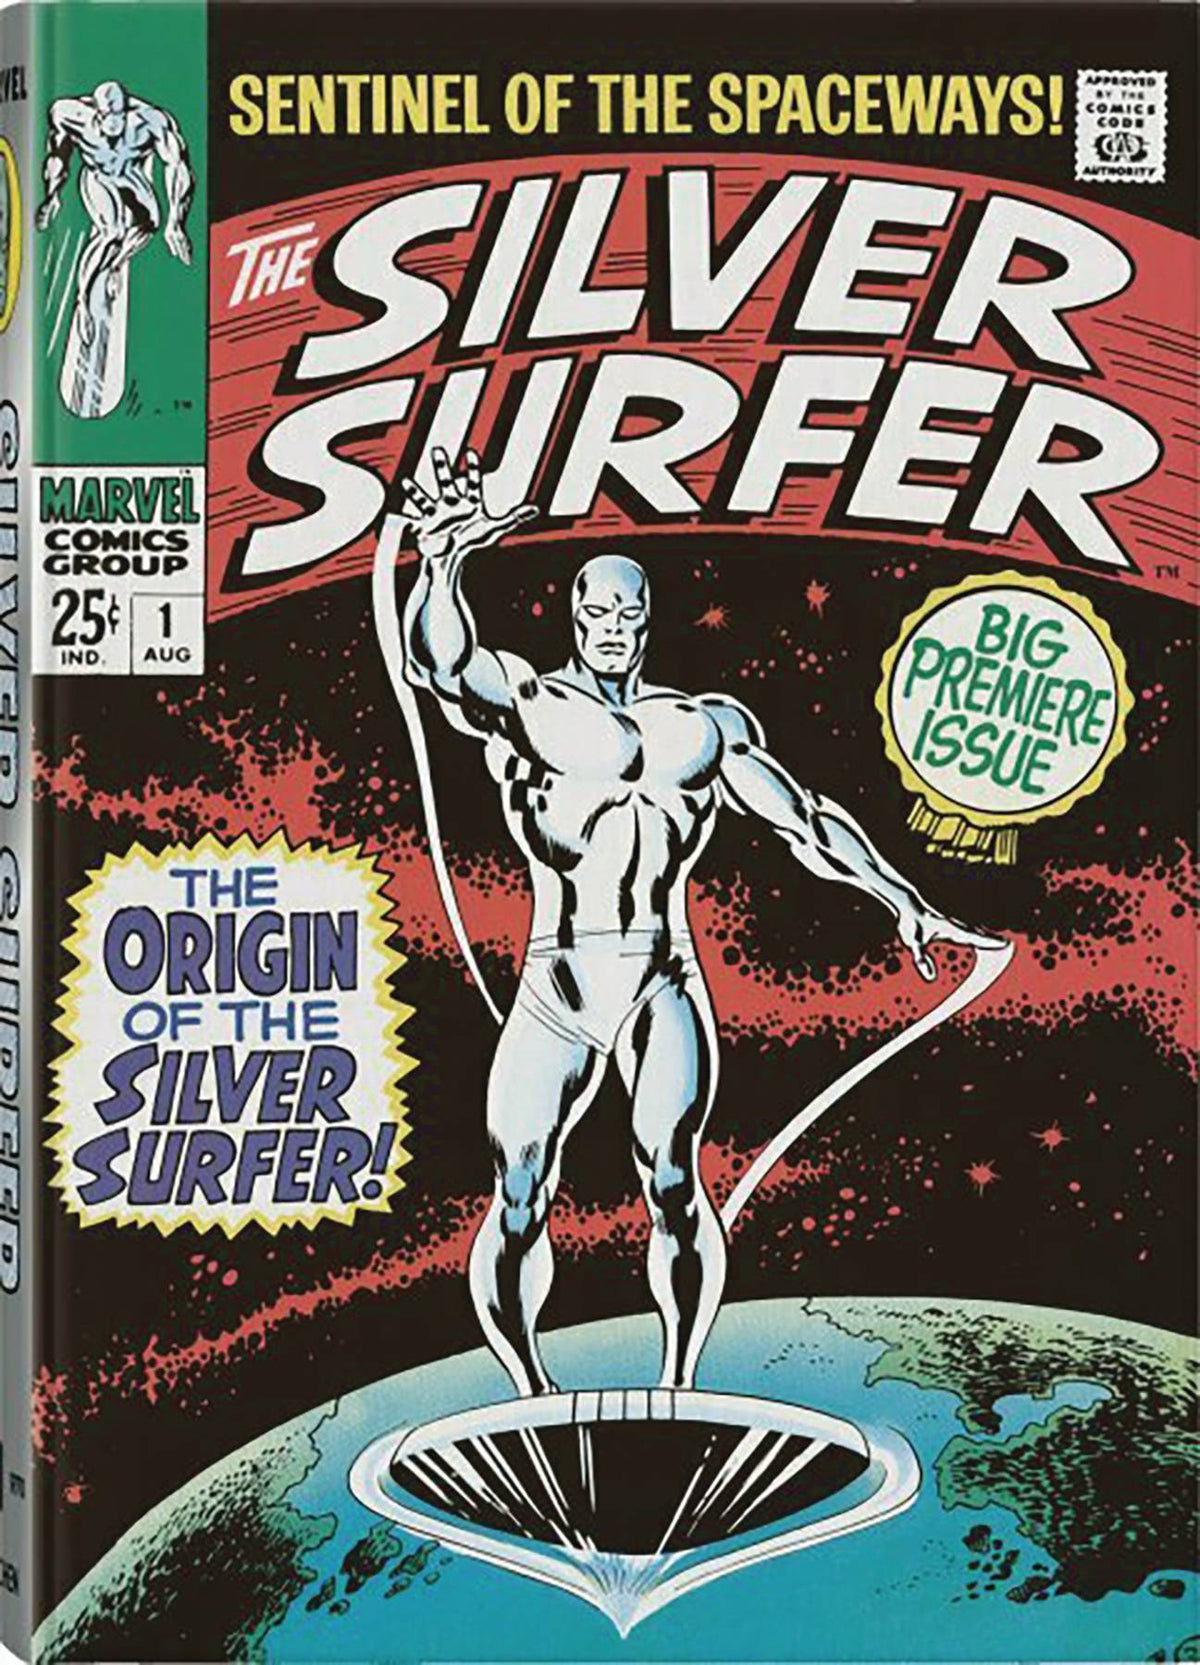 Marvel Comics Library Hc Vol 05 Silver Surfer 1968-1970 (C: - State of Comics